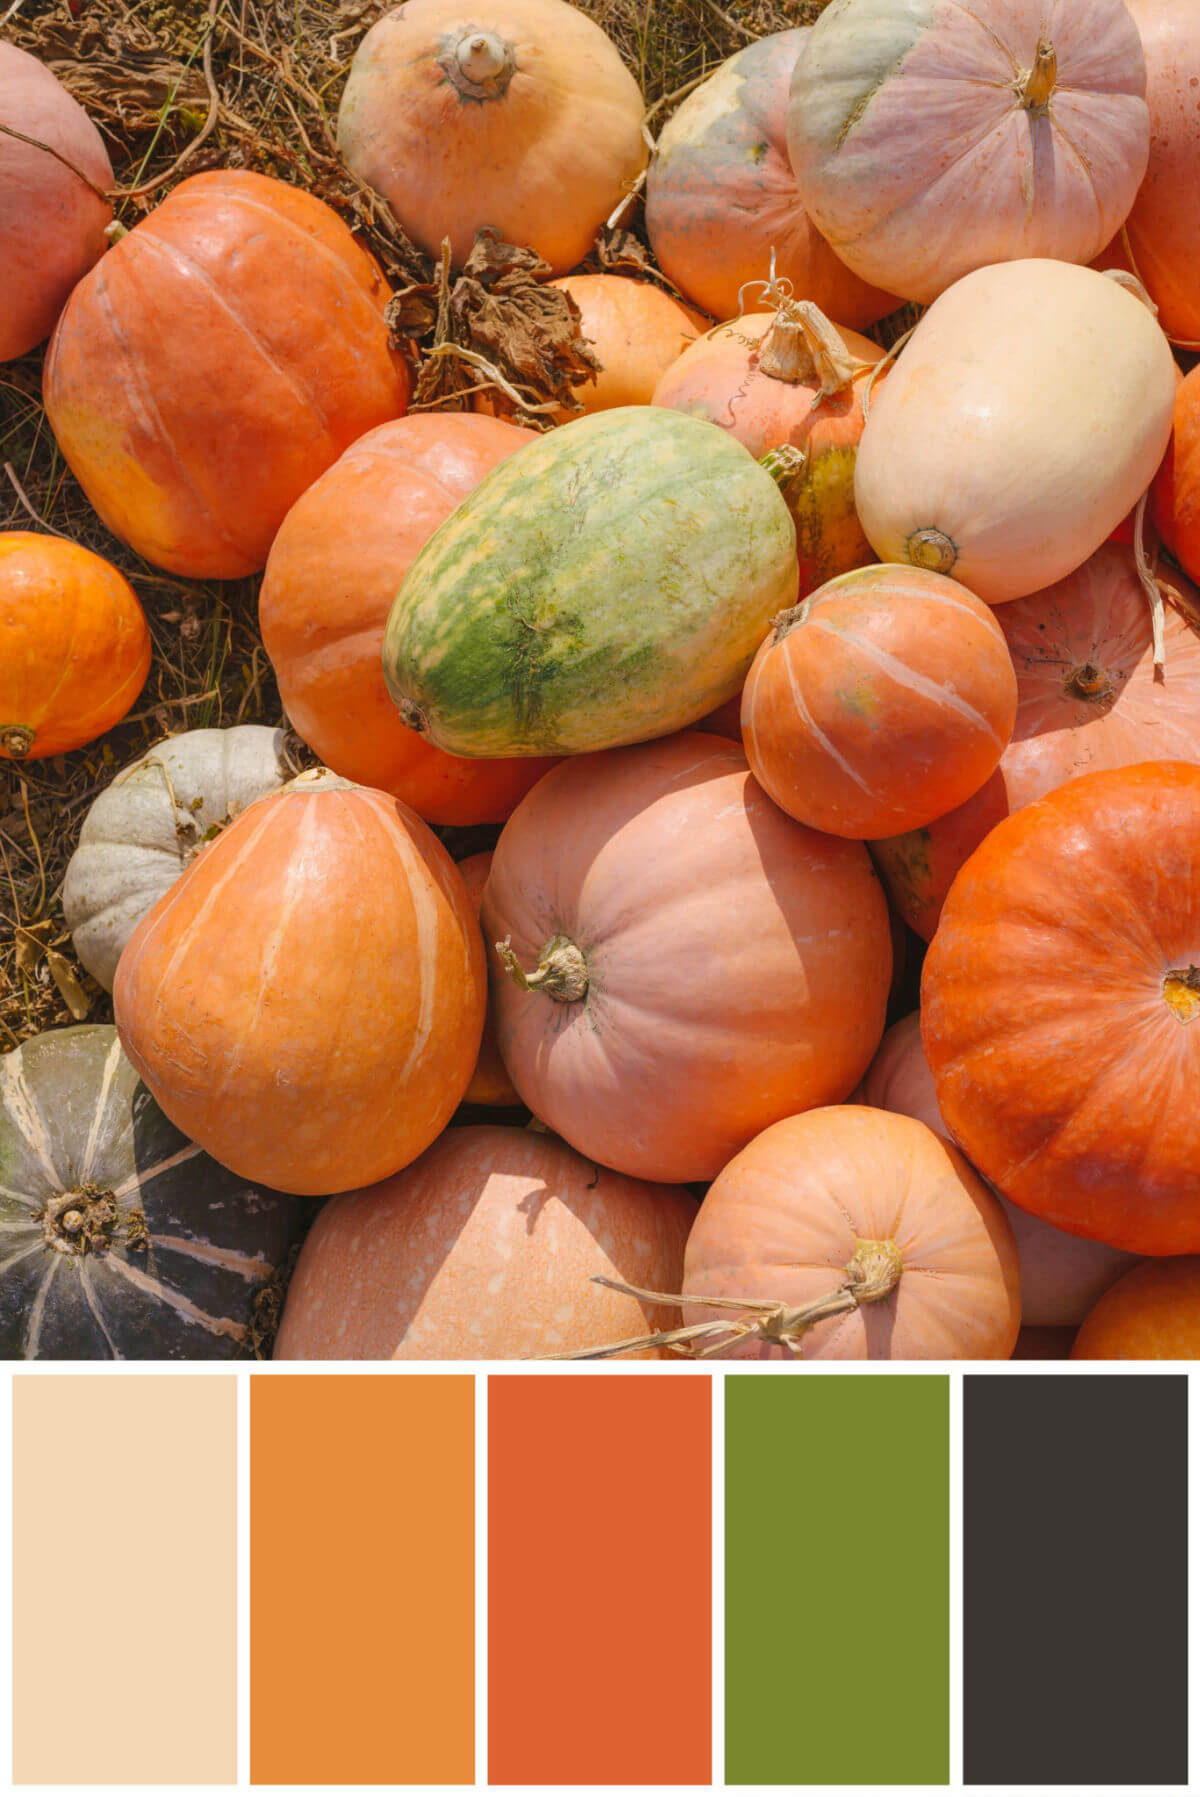 Colorful pumpkins outside on straw with a traditional Thanksgiving color palette below with colors tan, orange, dark orange, green, and dark grey. 